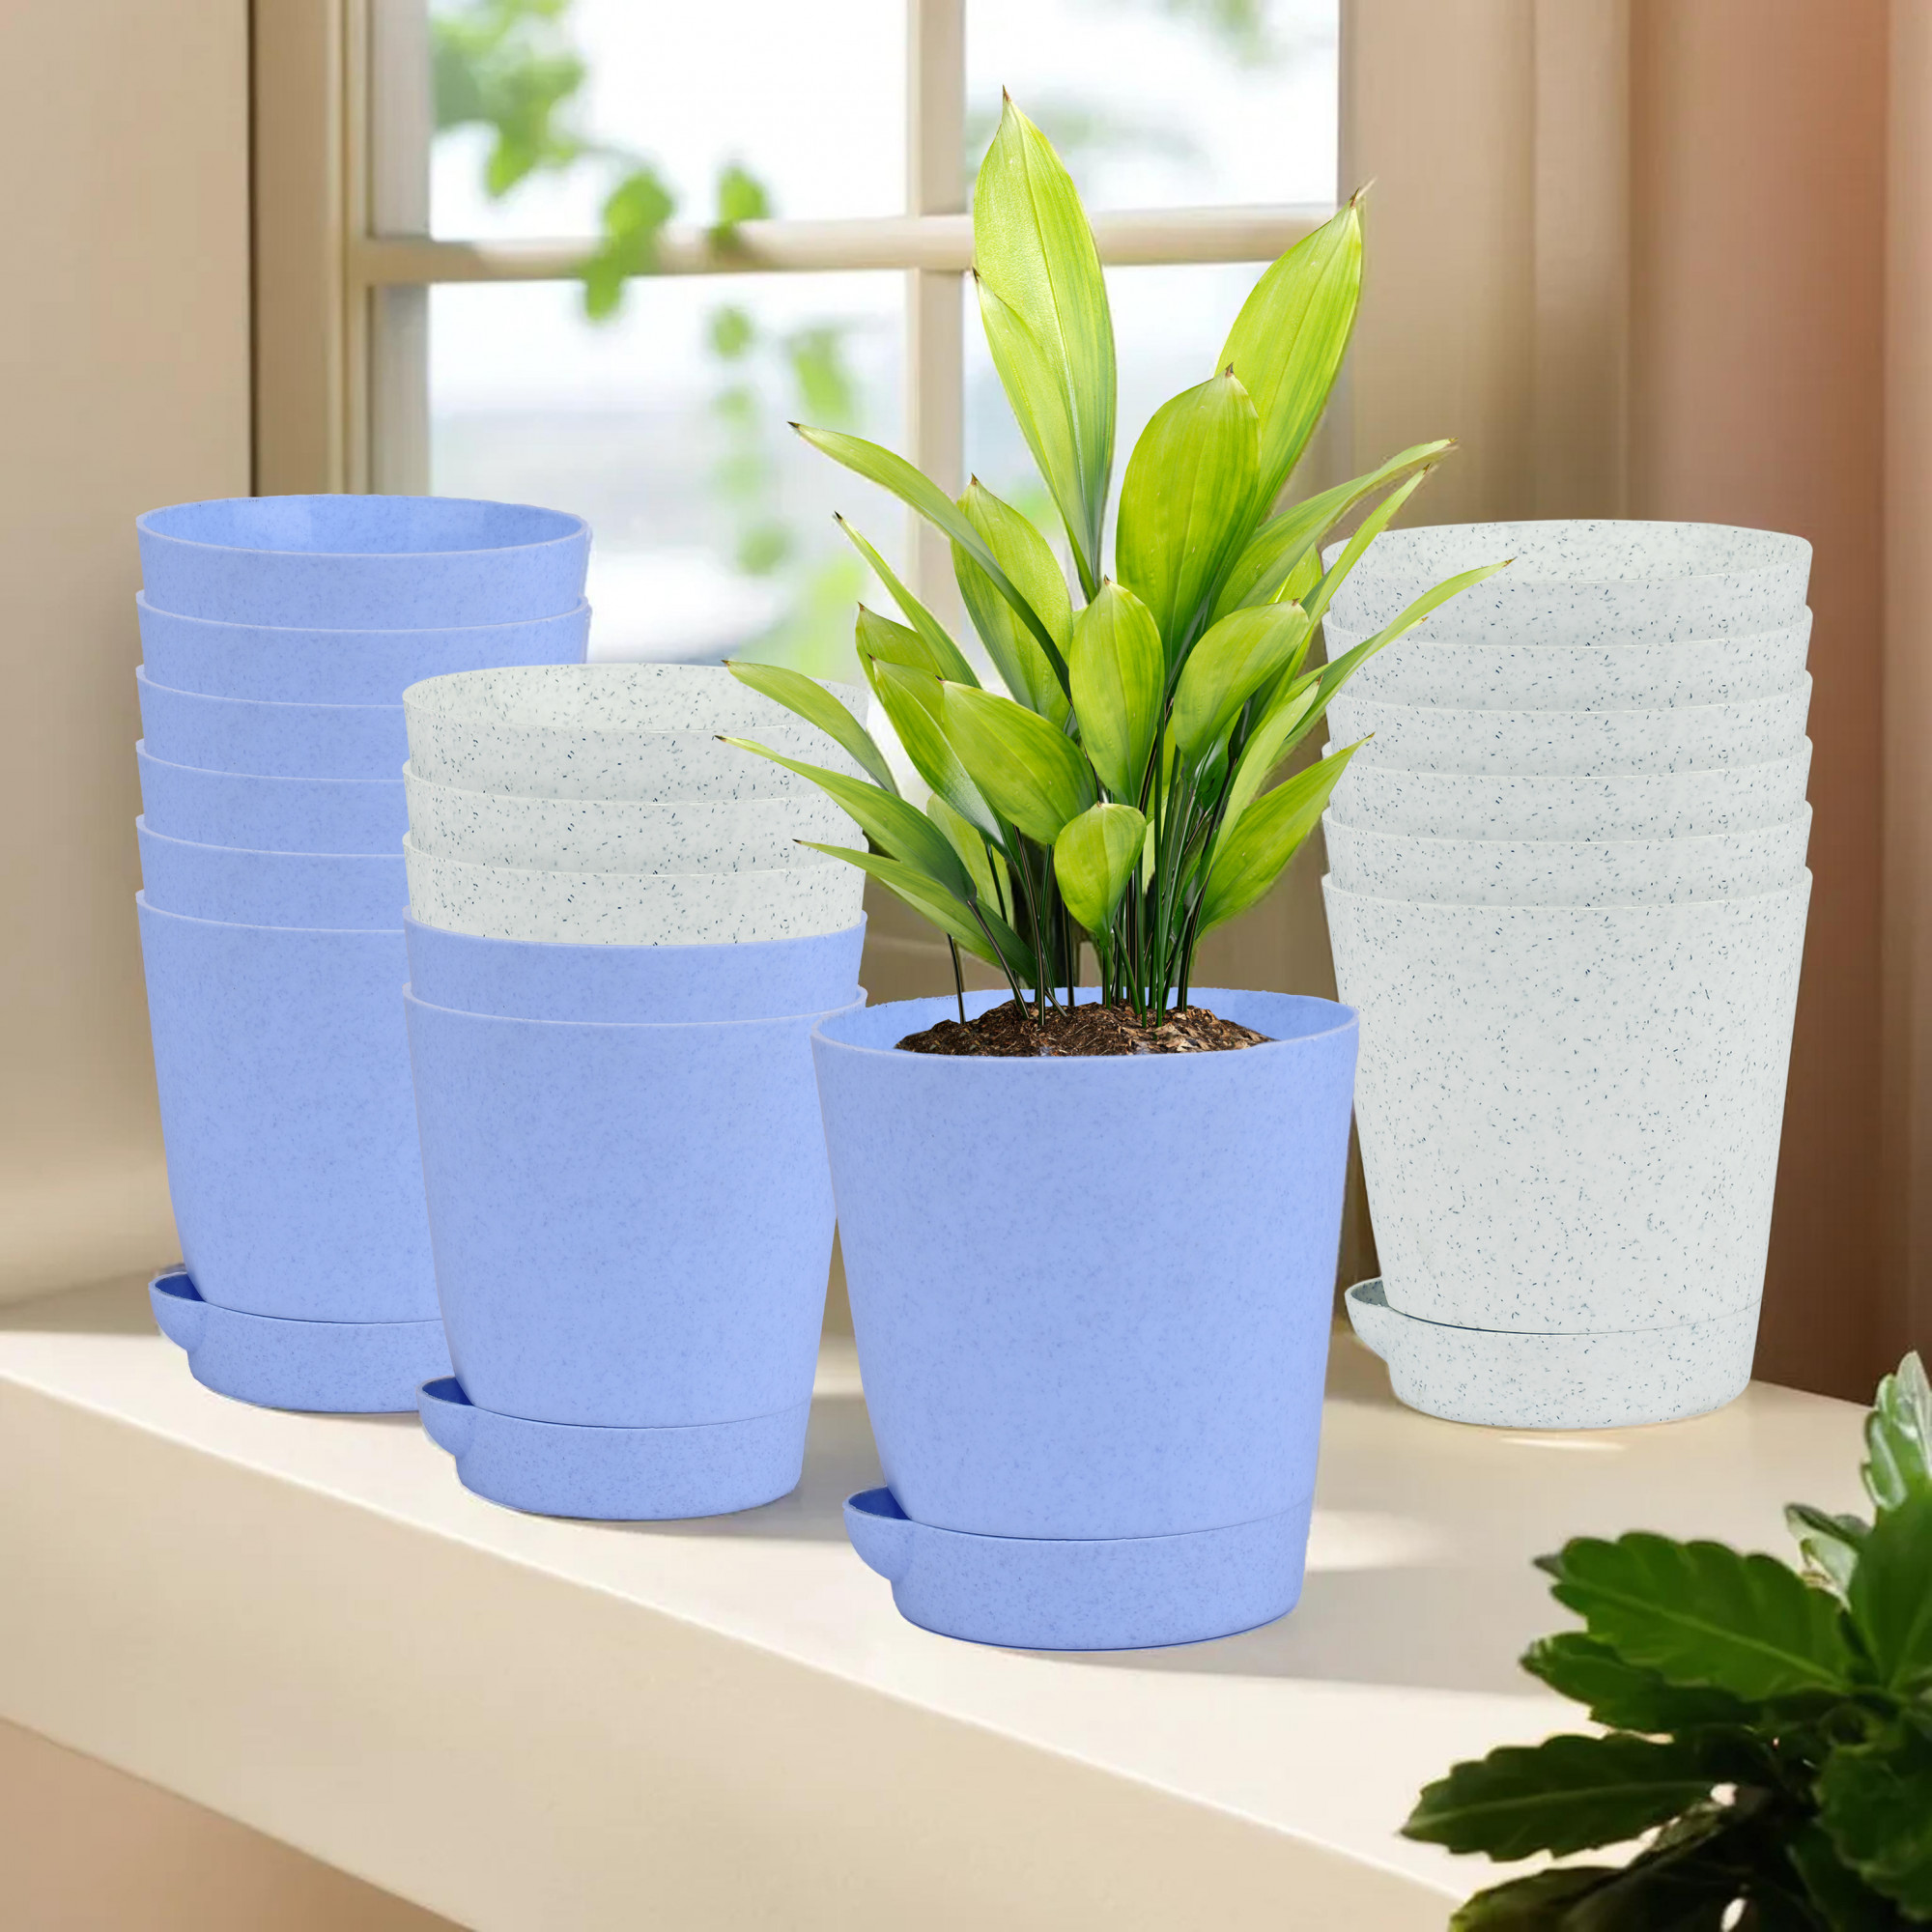 Kuber Industries Flower Pot | Flower Pot for Living Room-Office | Planters for Home-office-Lawns & Garden Décor | Self Watering Flower Planters Pots | Marble Titan | 4 Inch | Blue & White